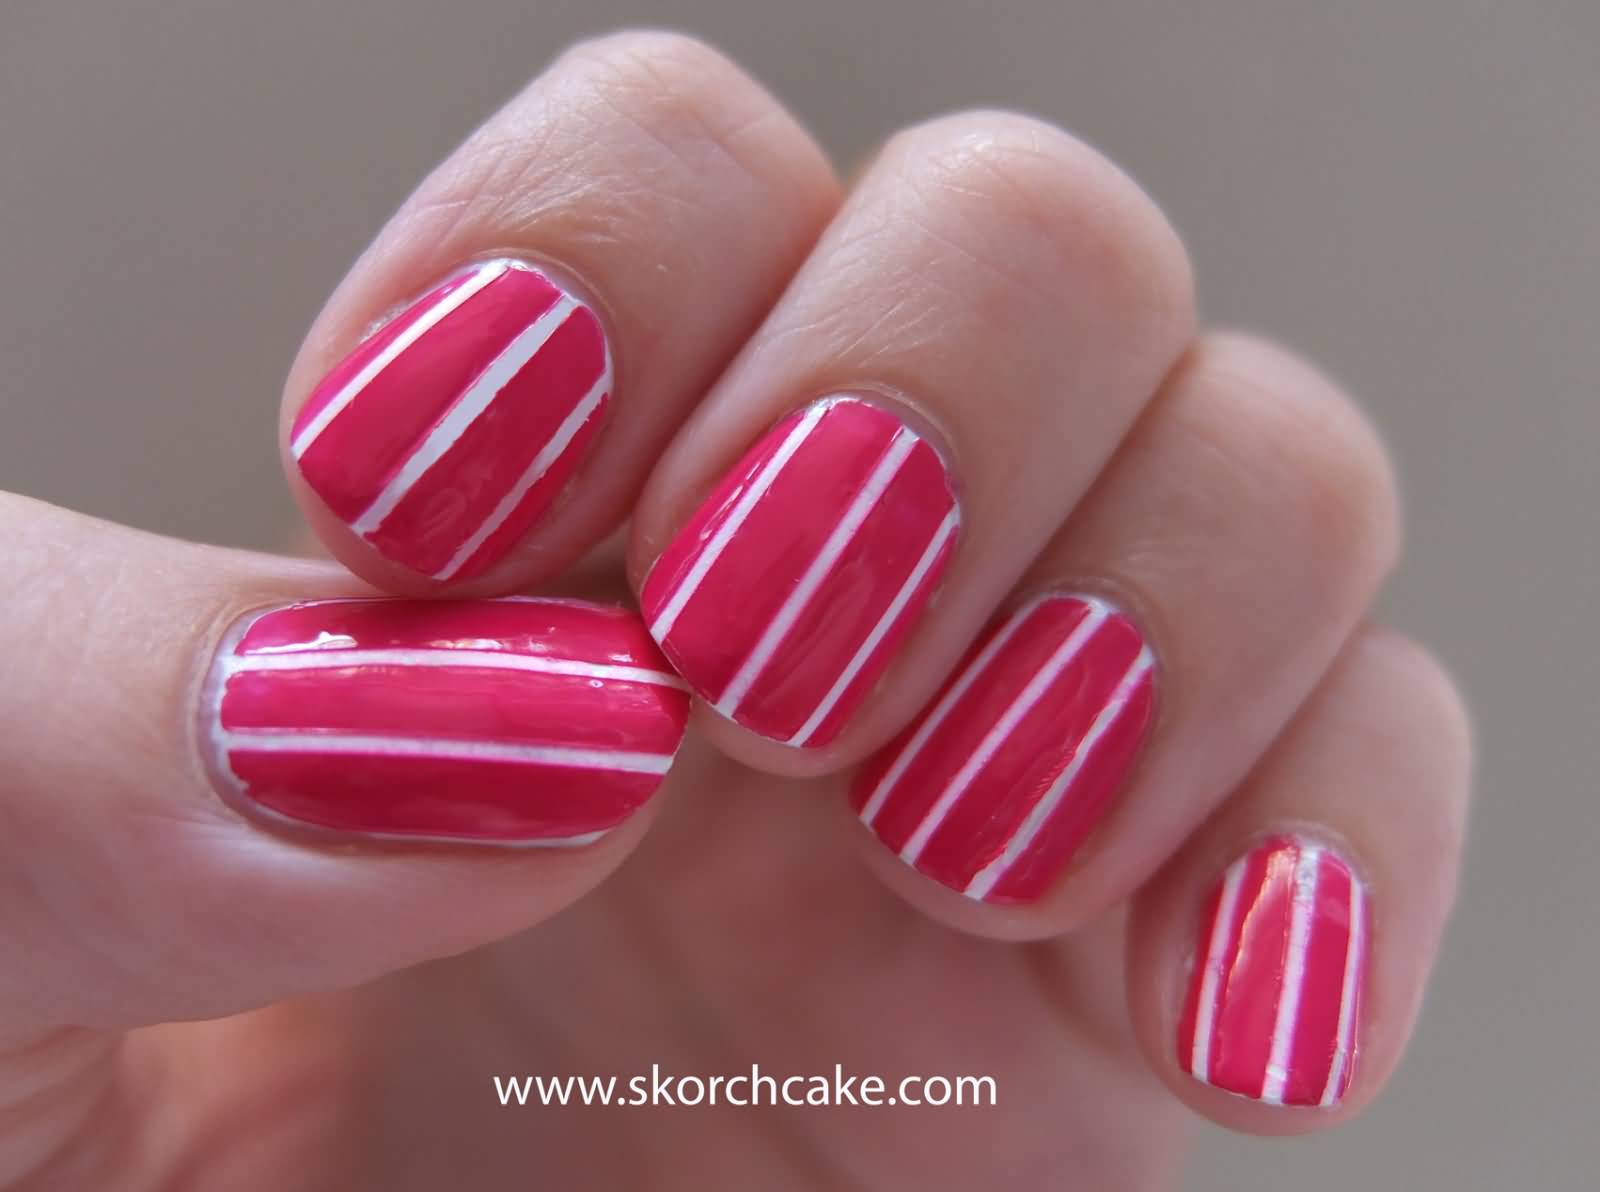 Pink Nails With White Stripes Nail Art